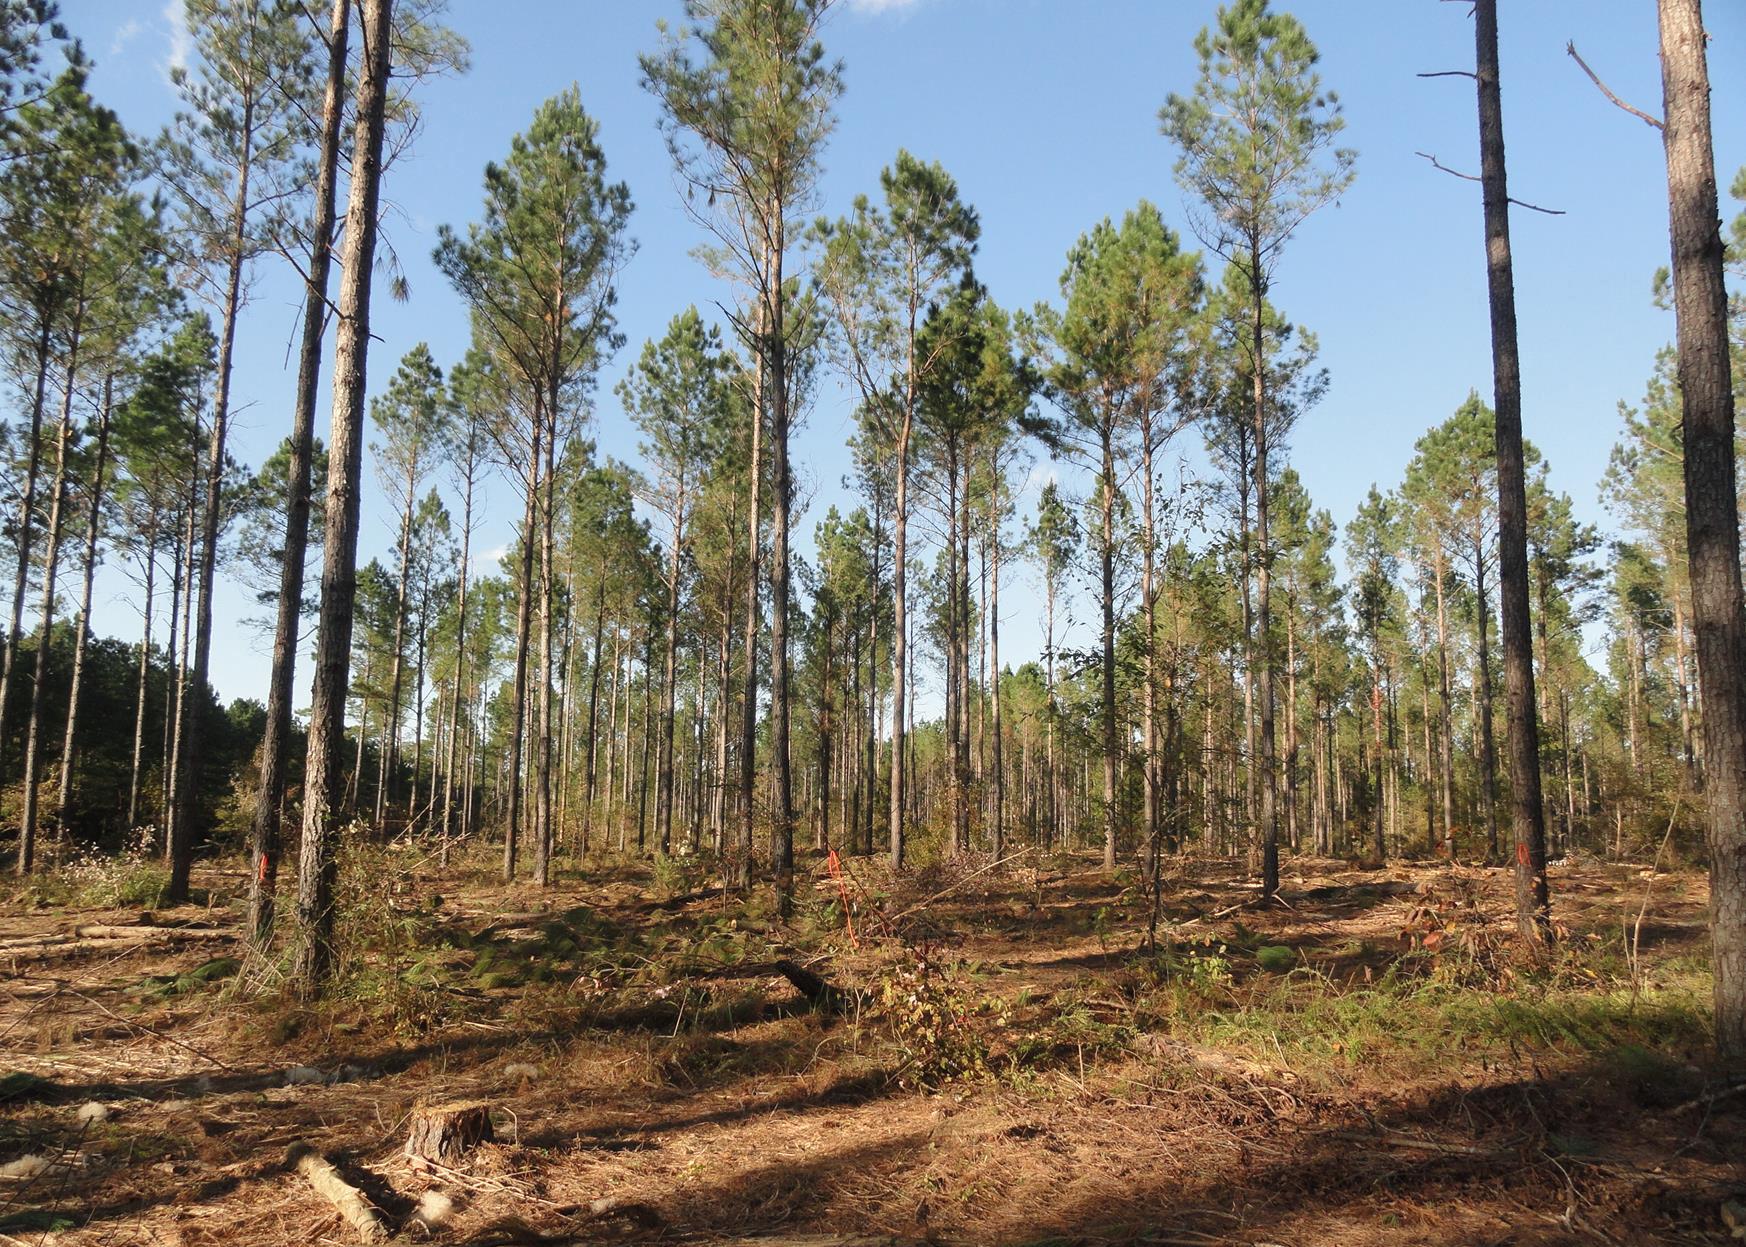 Mississippi State University scientists are creating a 550-acre demonstration forest in Oktibbeha County by thinning timber to different densities. This section has been thinned to create bobwhite quail habitat. (Photo courtesy of Misty Booth)